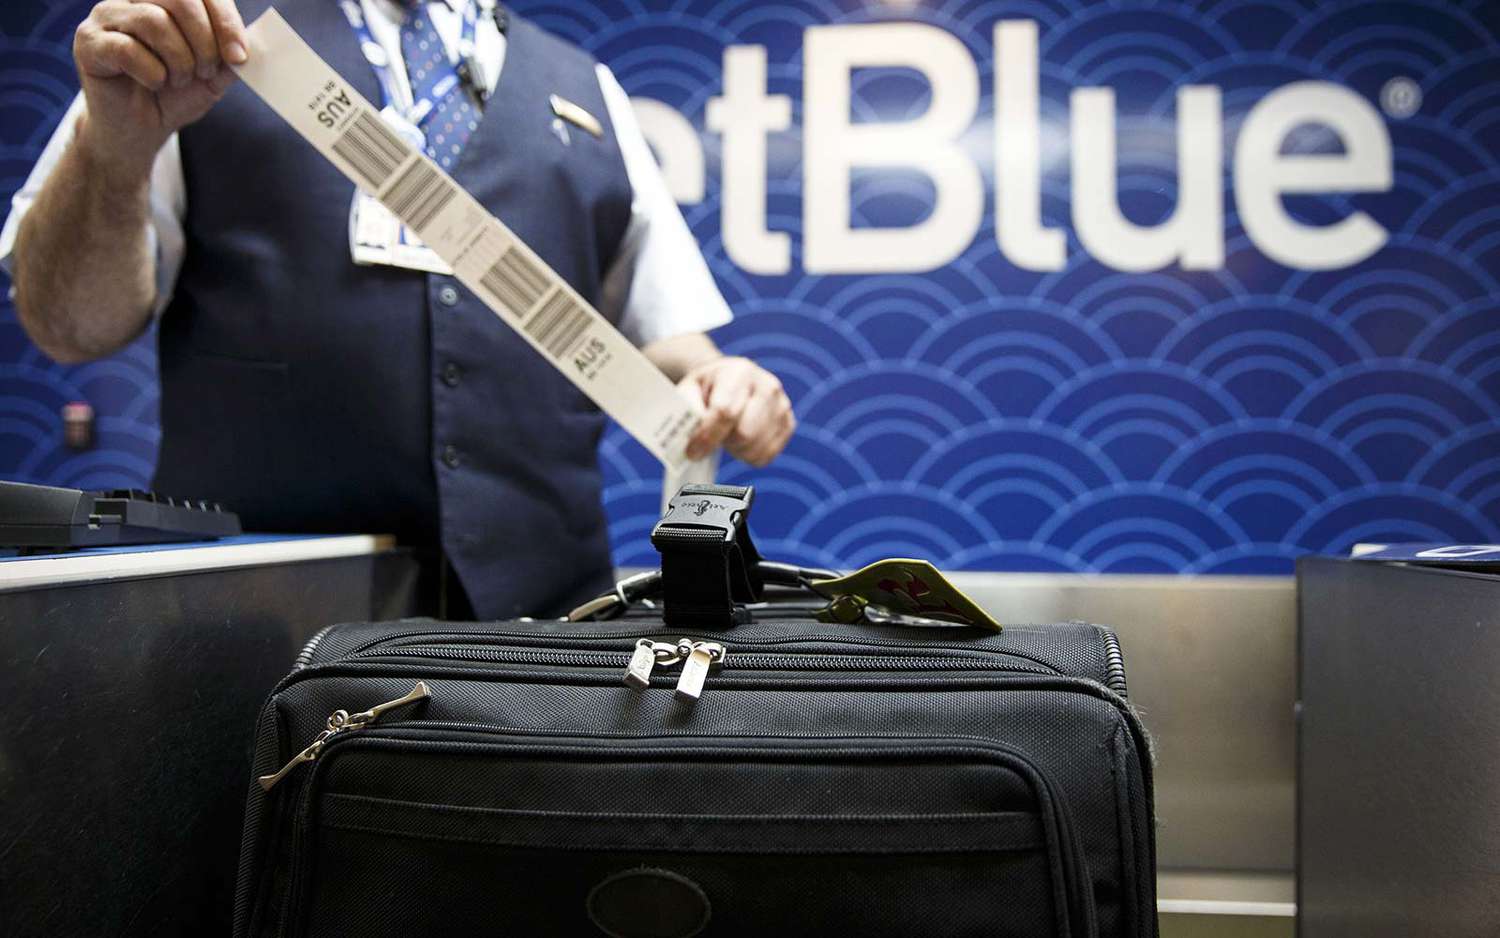 JetBlue Airlines Has Implemented a Pricing Practice That Has Sparked a Debate